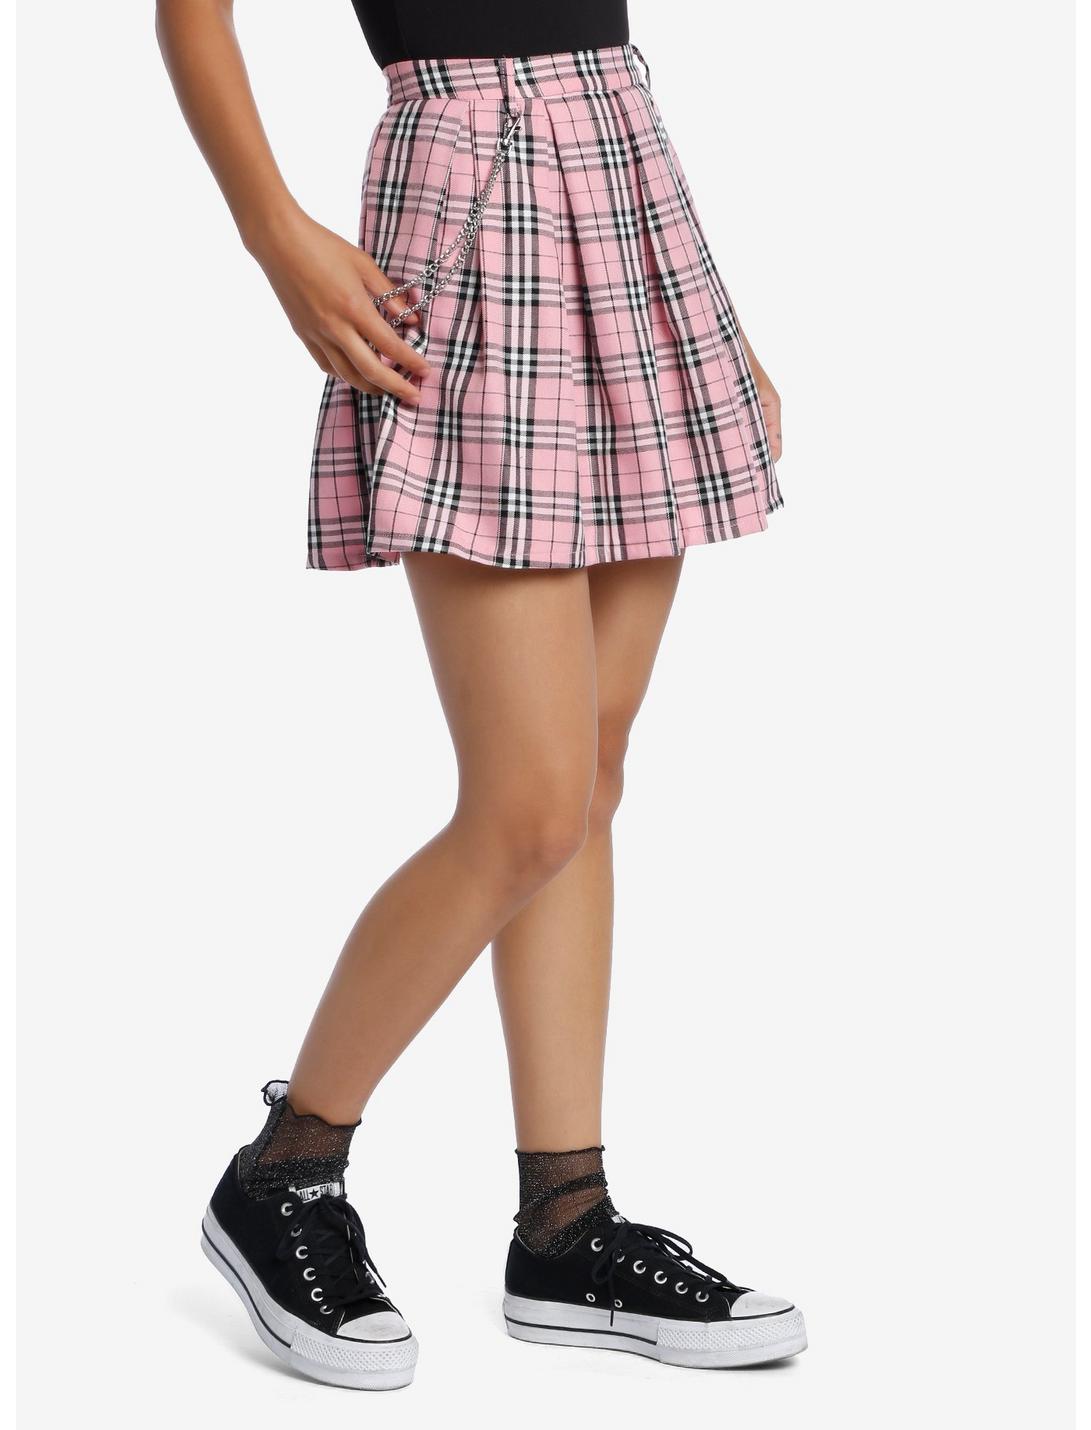 Pink Plaid Pleated Chain Skirt, PLAID - PINK, hi-res